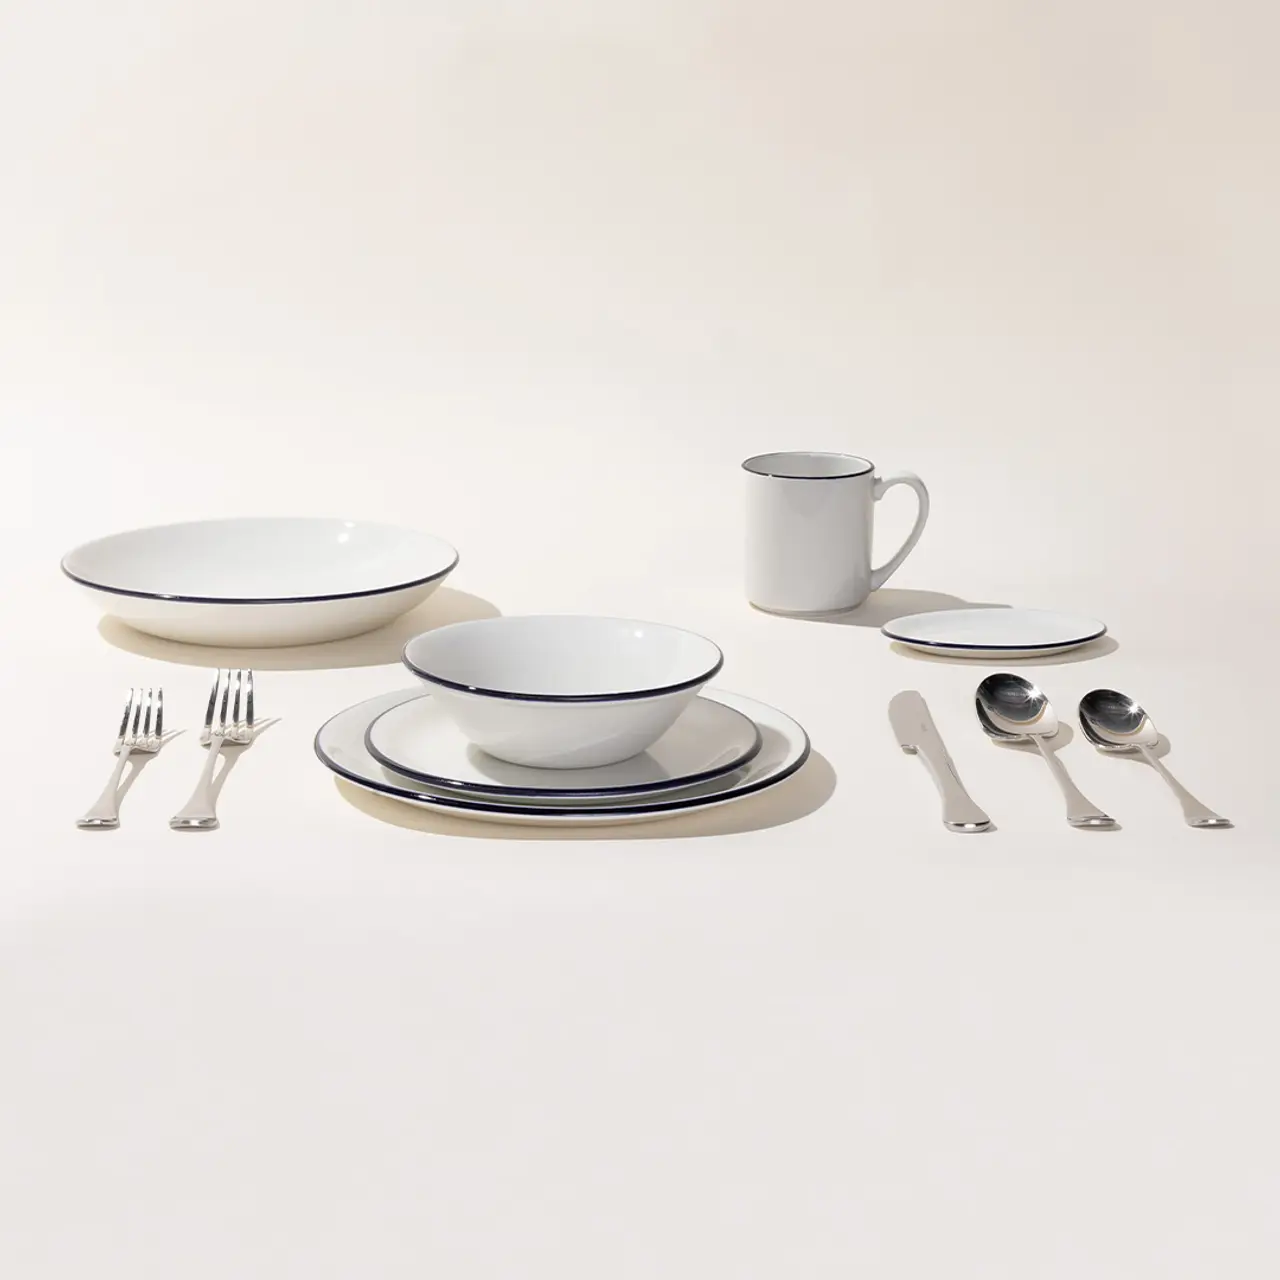 A neatly arranged dinnerware and cutlery set, including plates, bowls, a mug, and silverware, is showcased against a plain background.